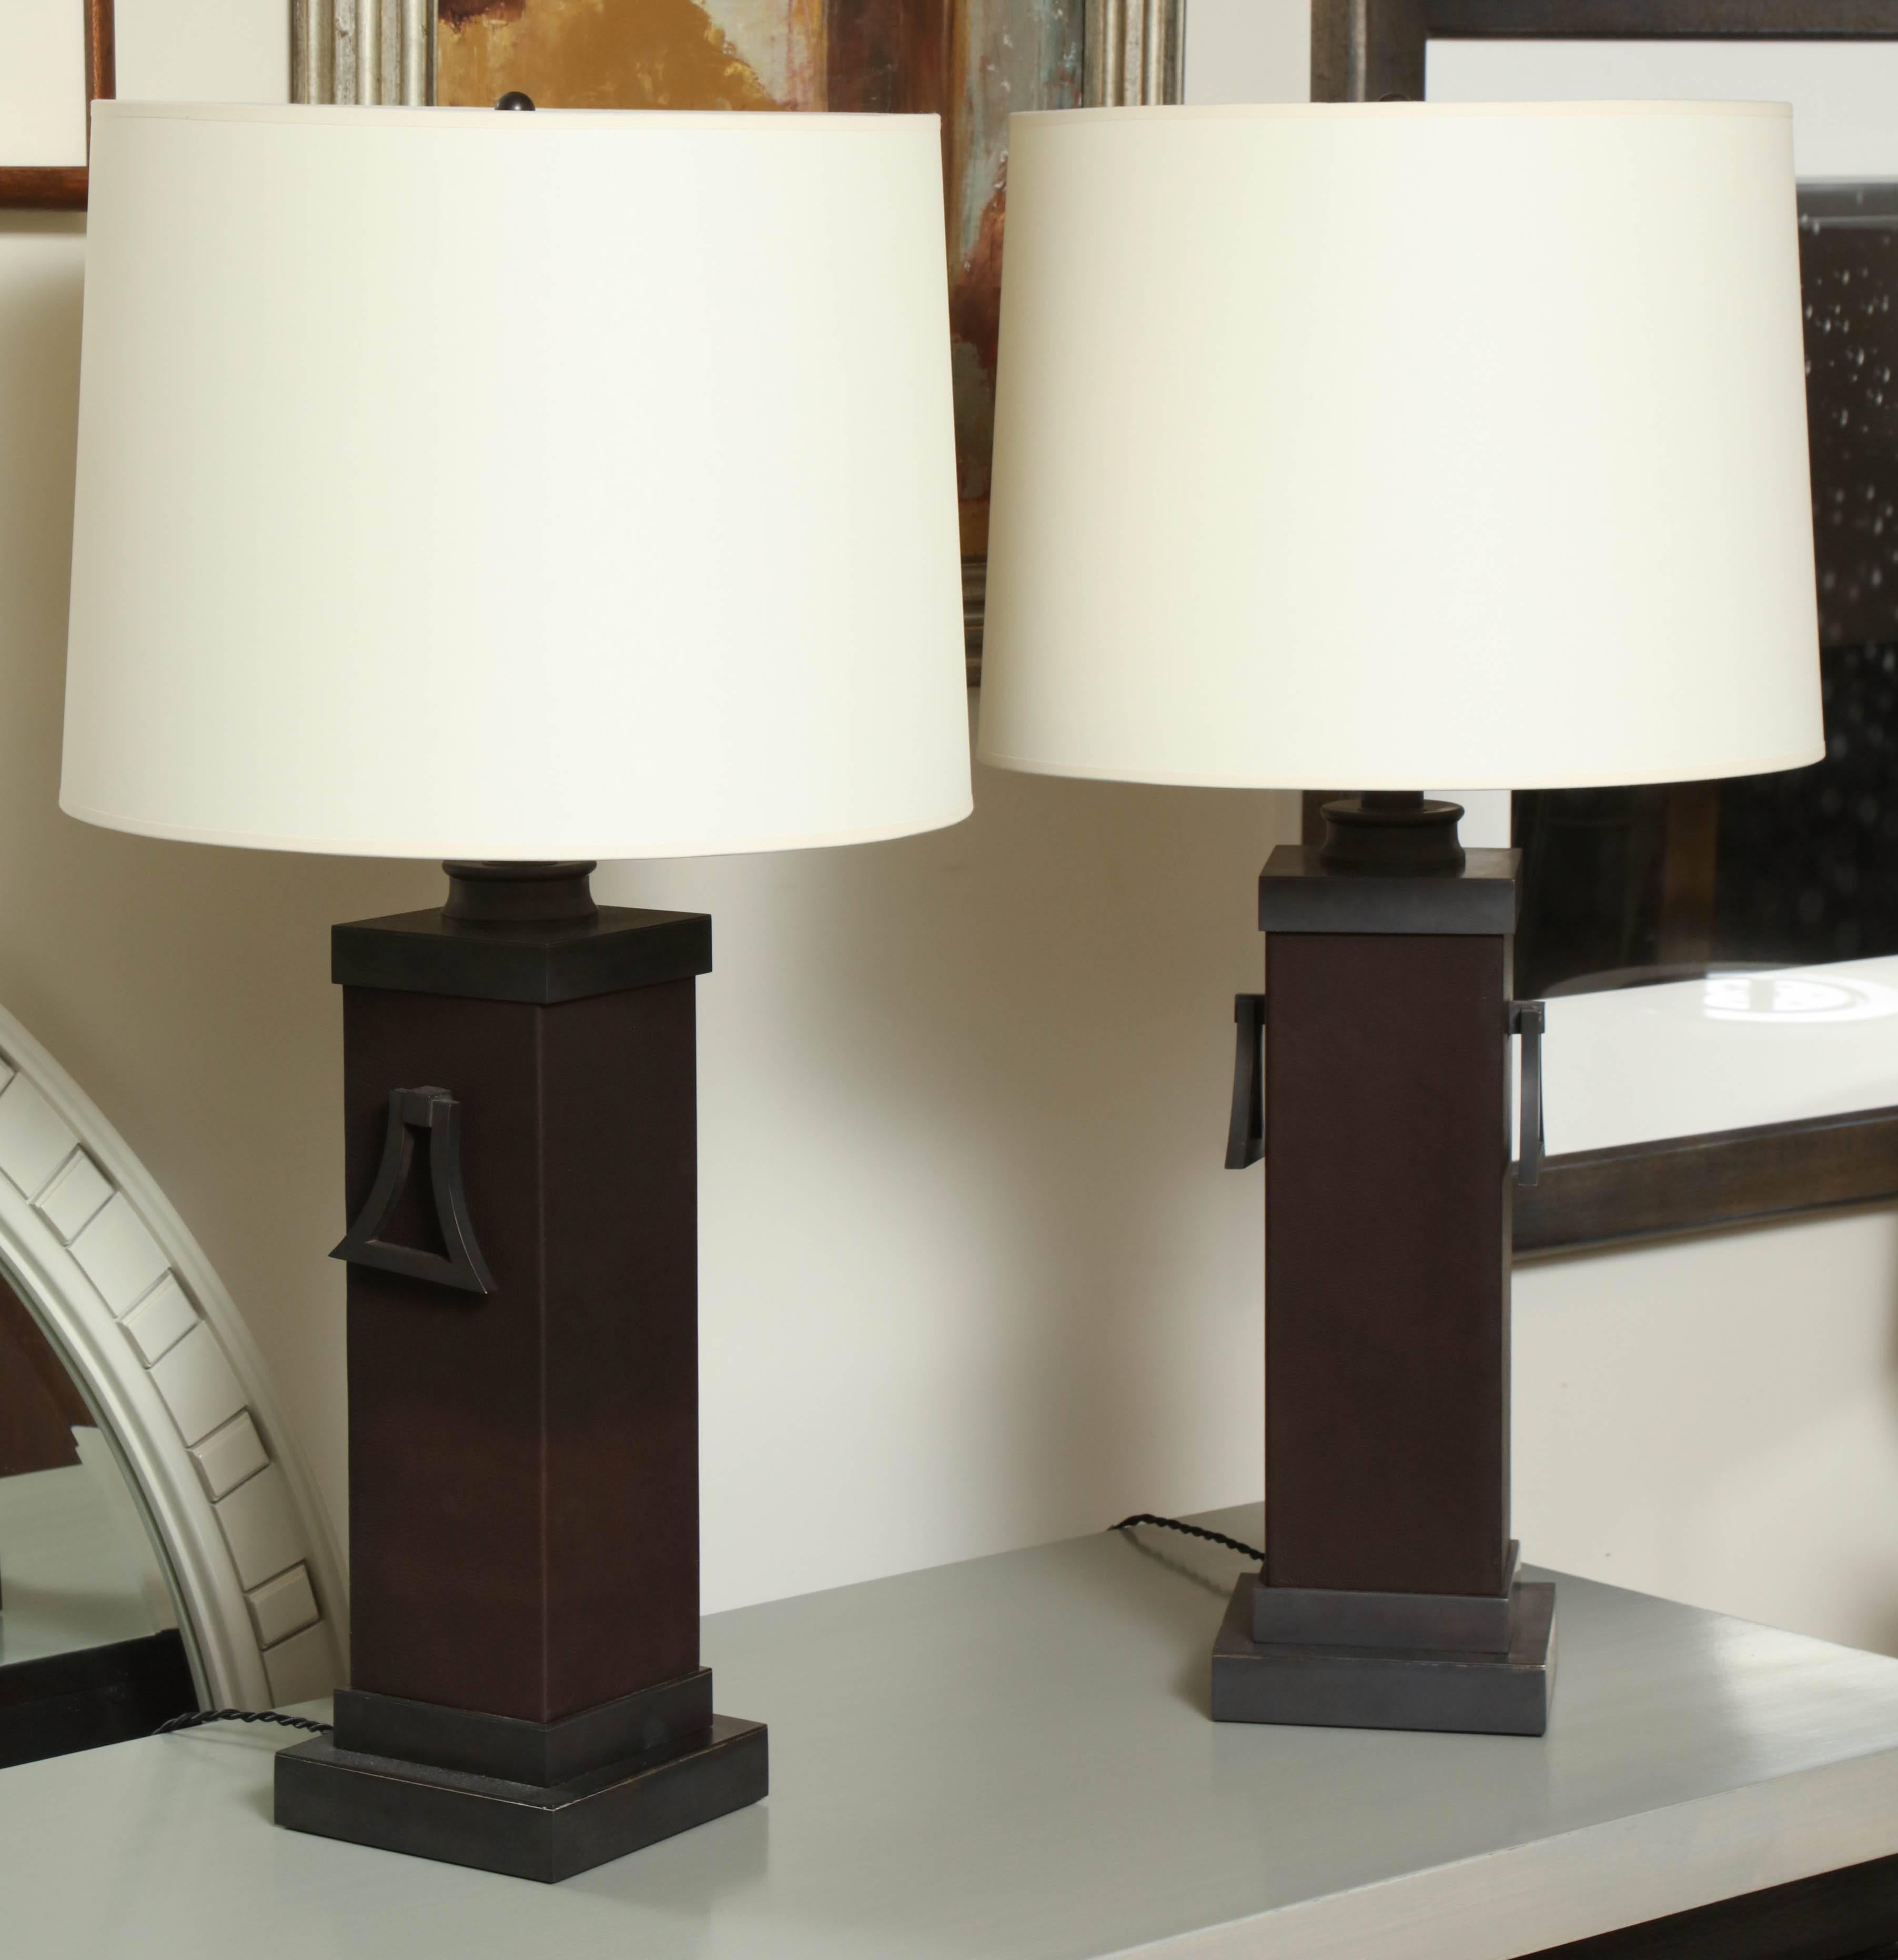 Pair of James Mont square column table lamps; metal components have been finished in bronze, new two-bulb sockets, and the columns have been clad in leather; new silk shades with rolled edges.